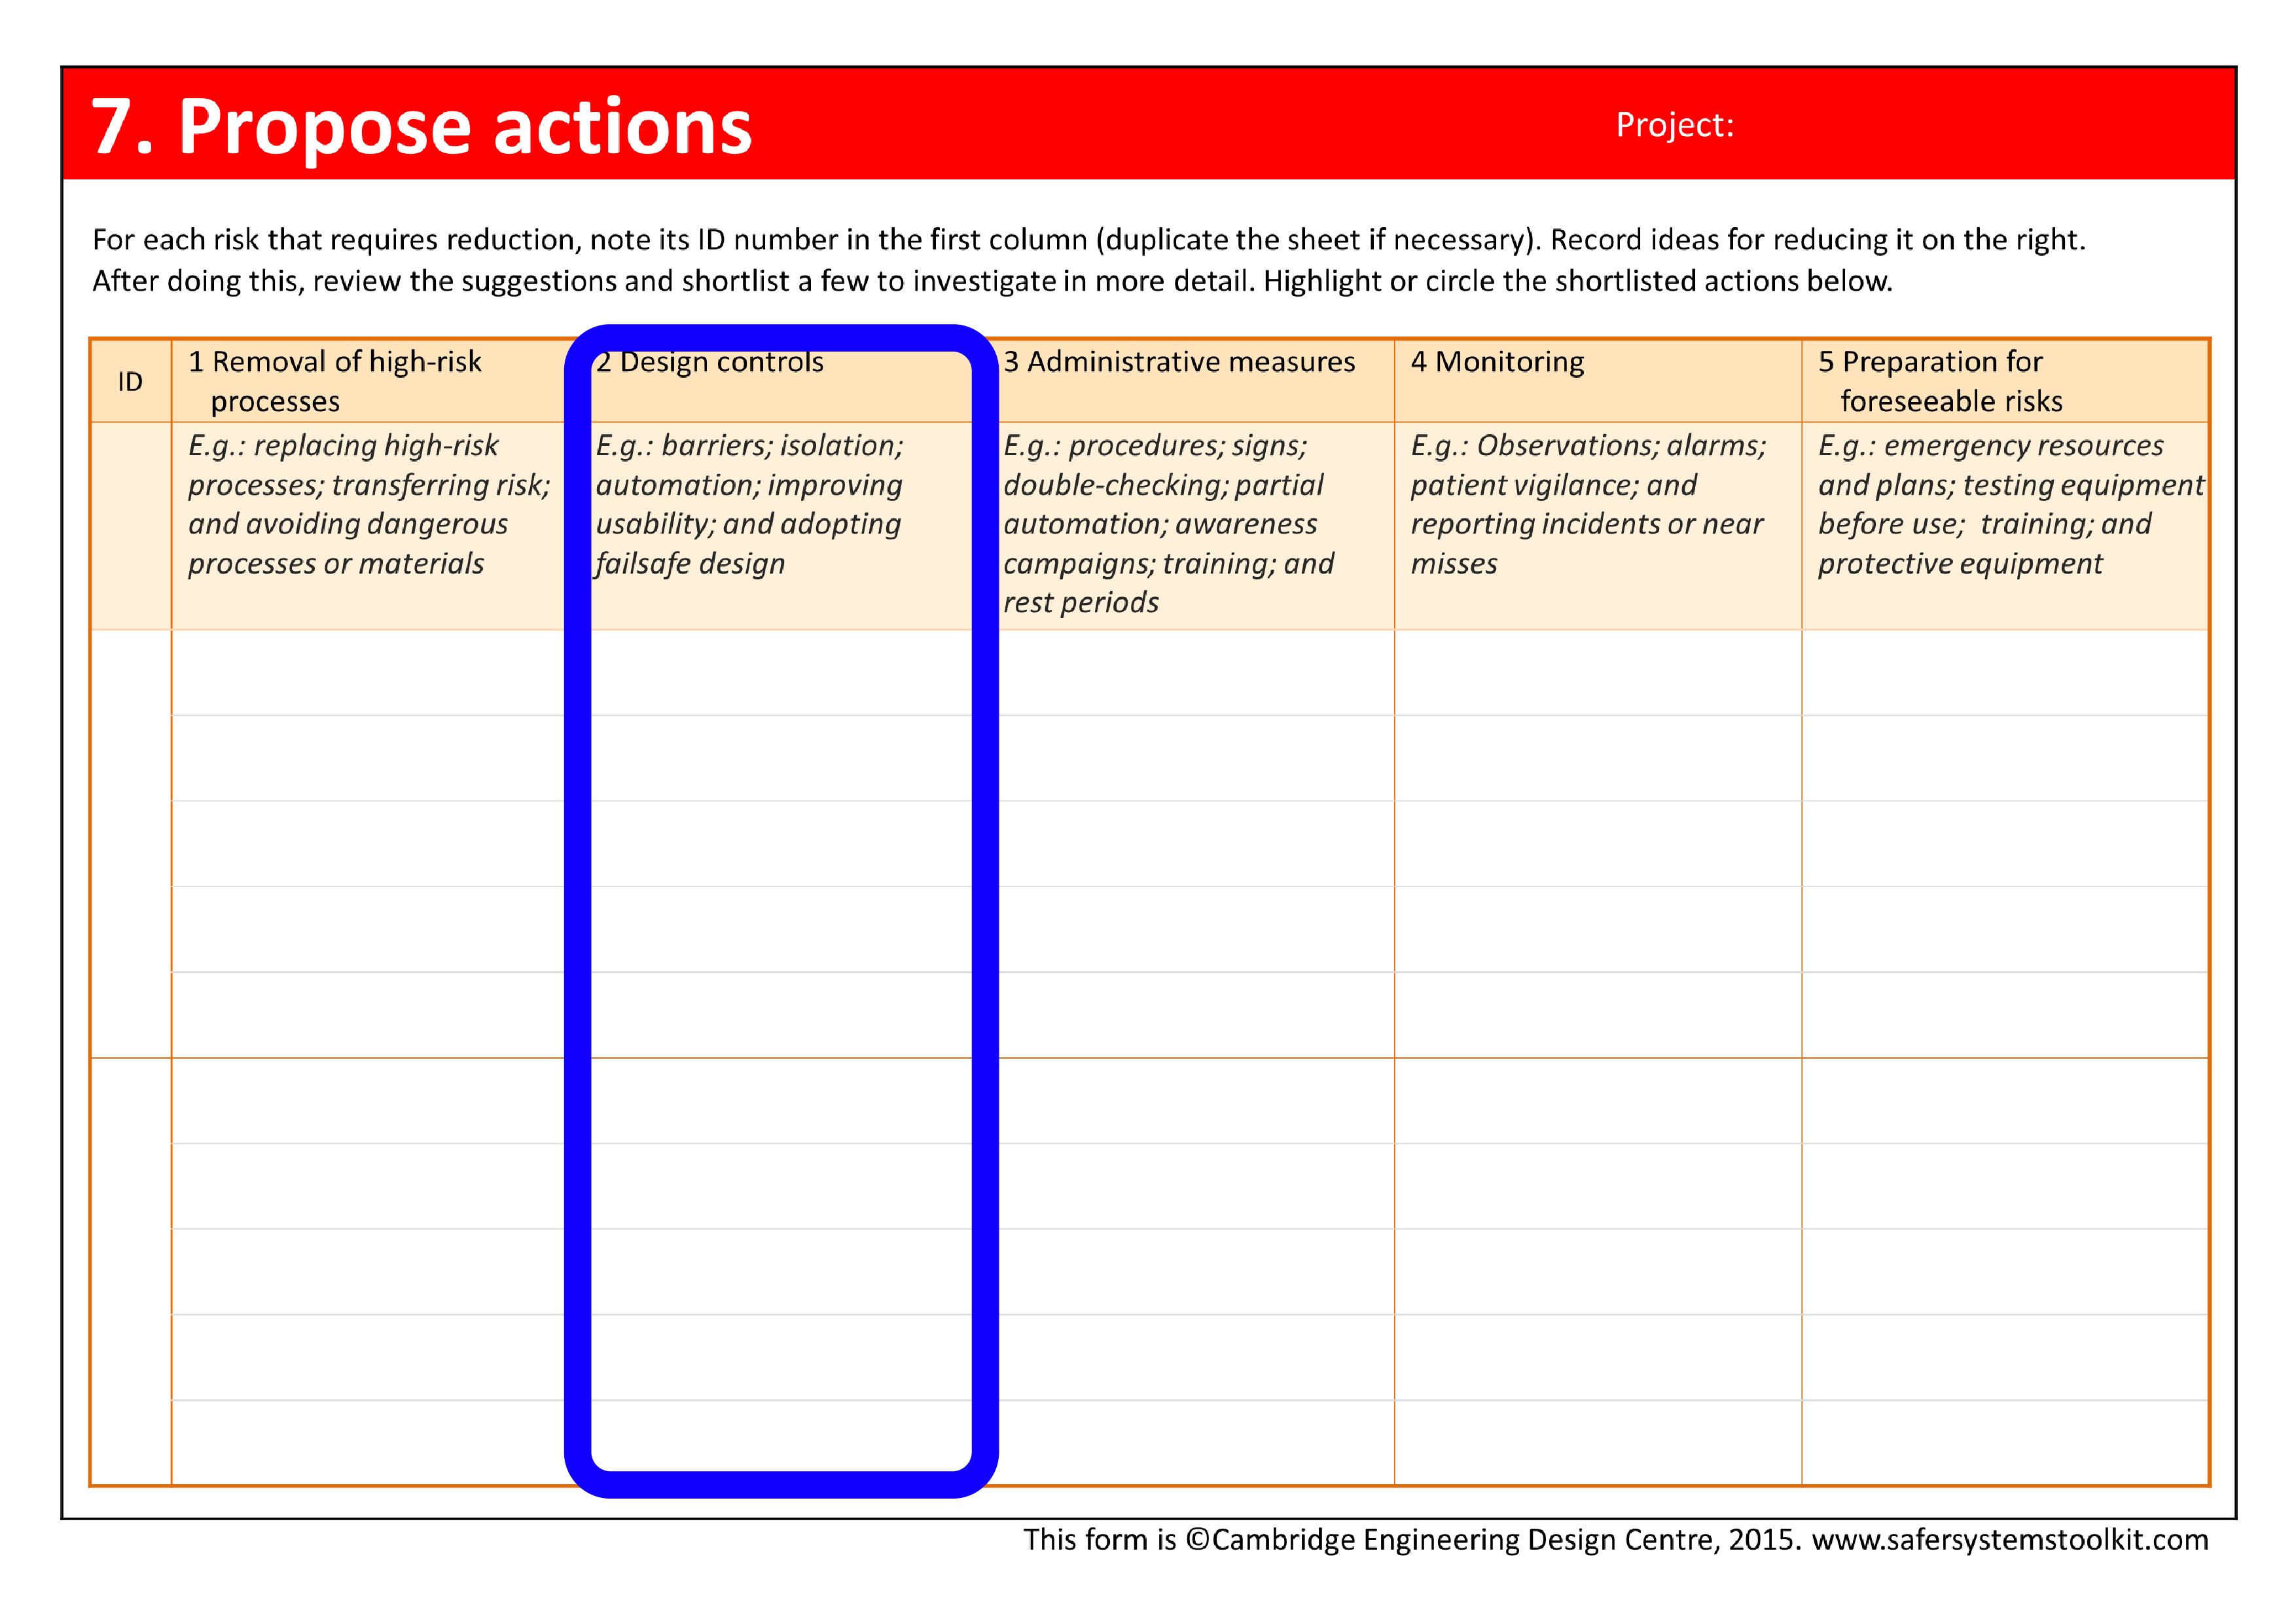 Screenshot of the Propose actions page of the assessment form